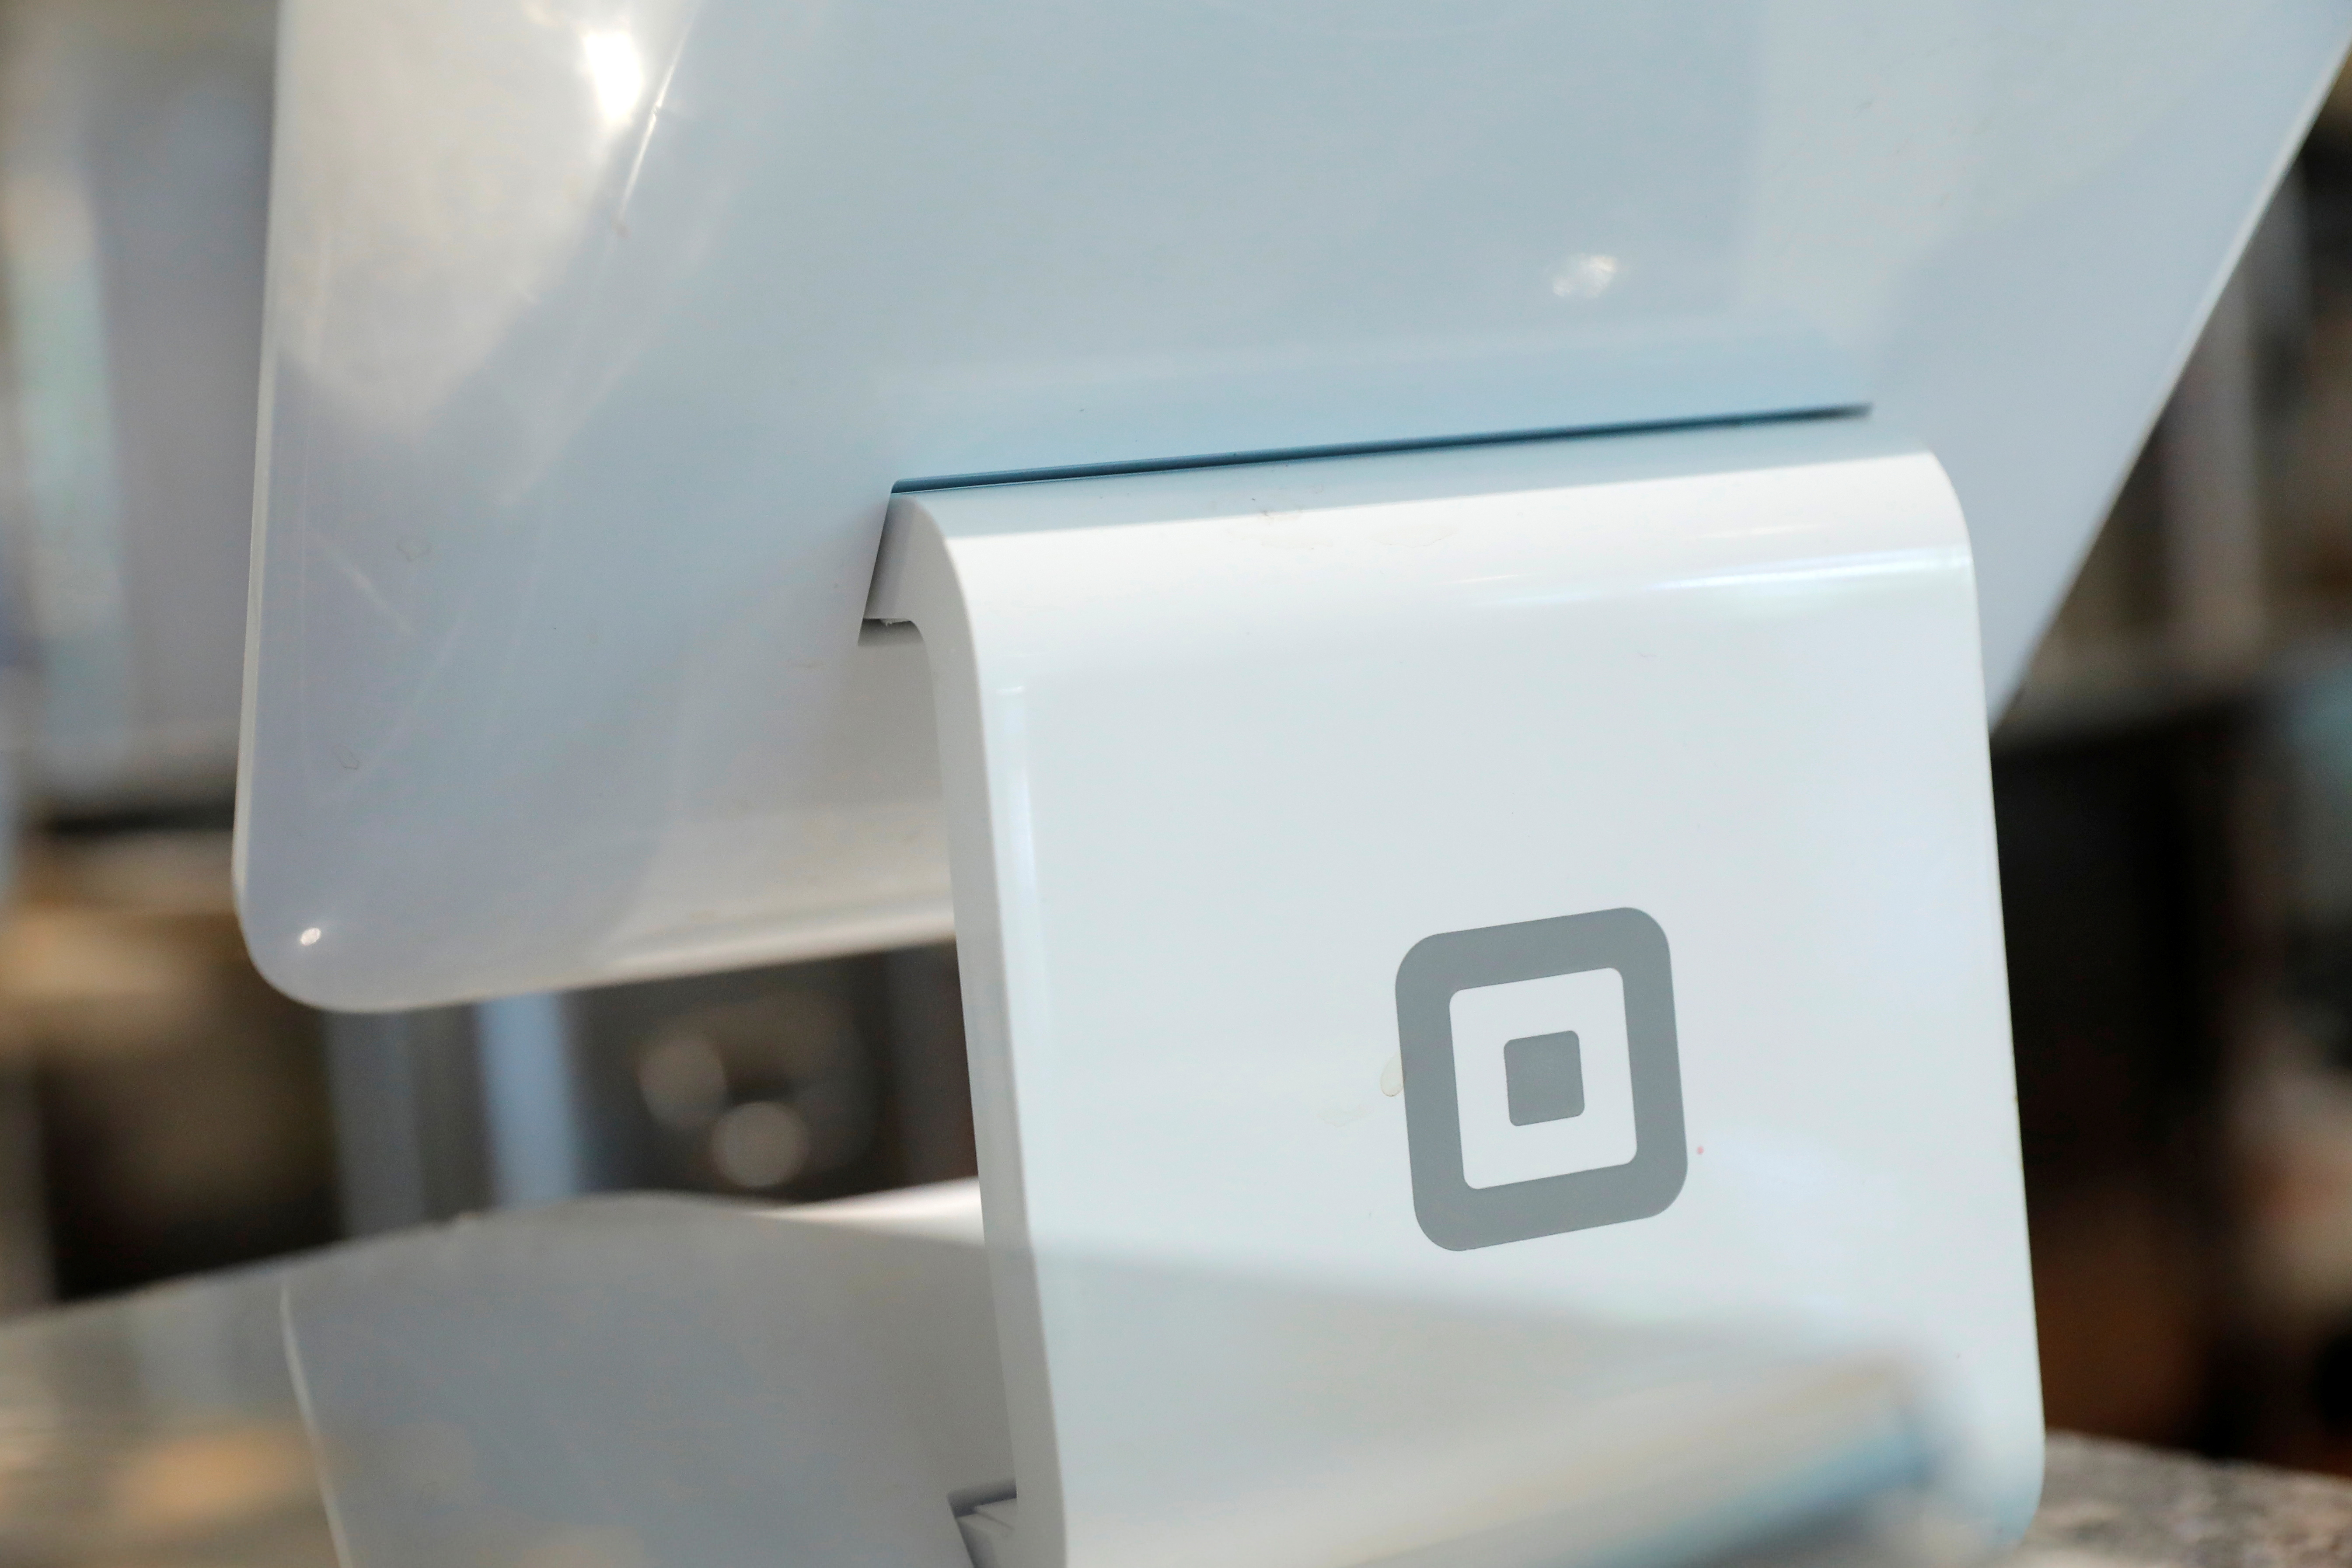 Square to acquire AfterPay in $29 billion deal- The Asian Banker